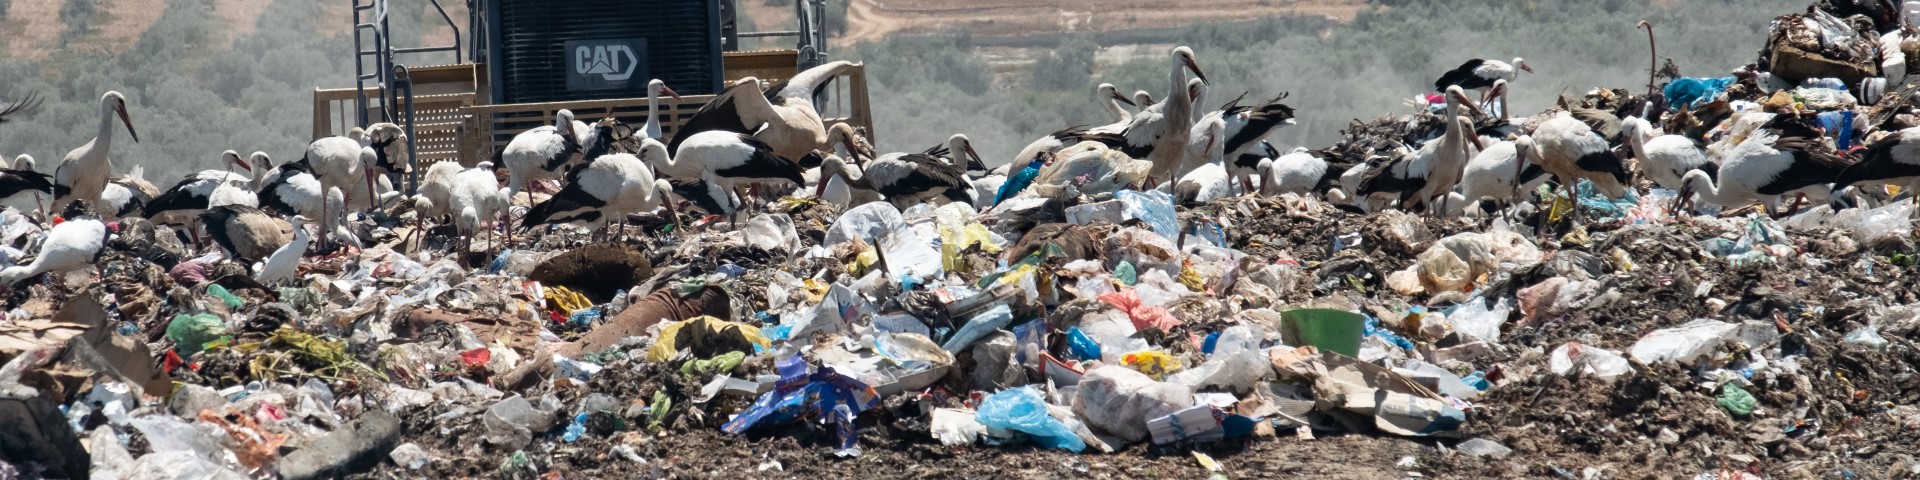 Birds search for food scraps on a landfill. An excavator stands in the background.